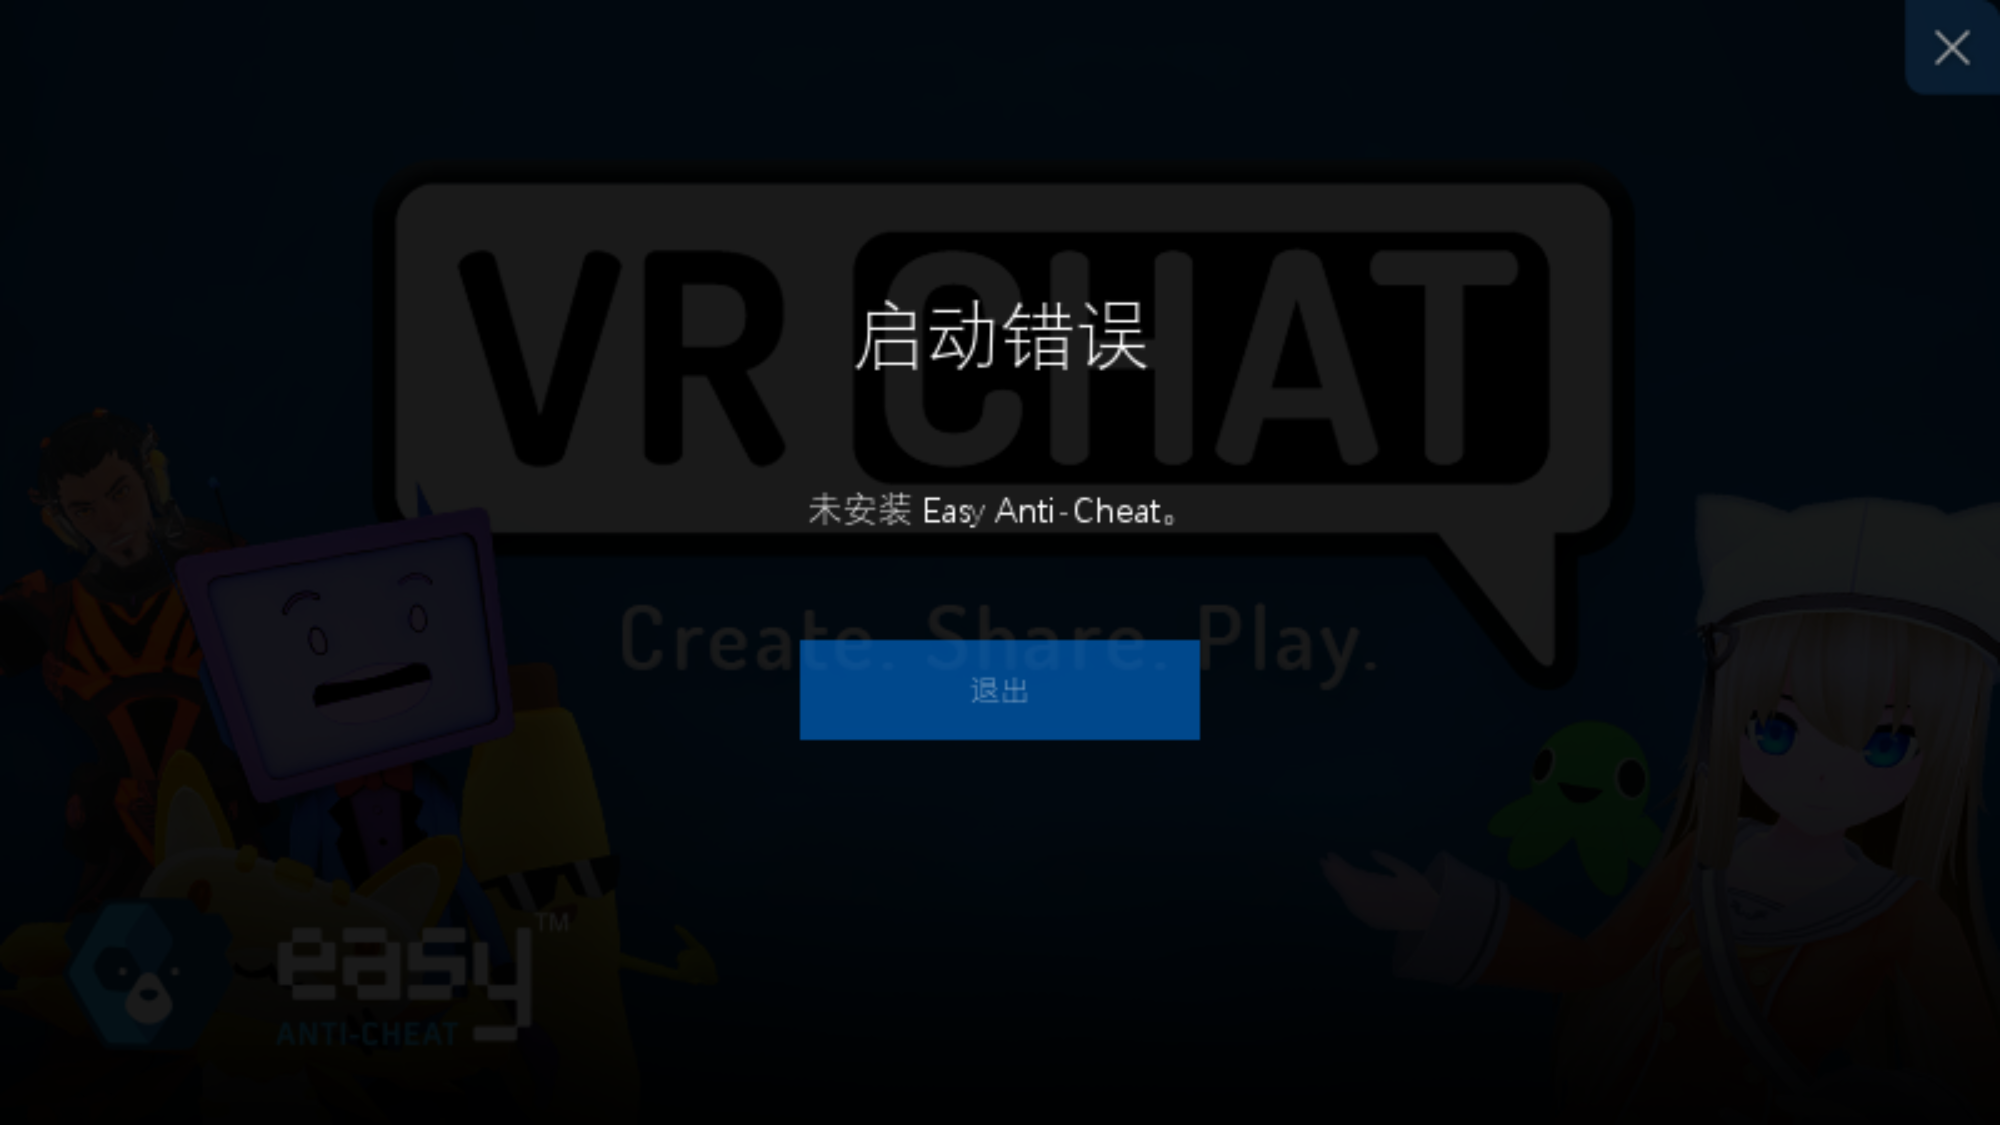 VRChat - Easy Anti-Cheat is not installed Fix - 解决方法 / Solution - 69F0BA7